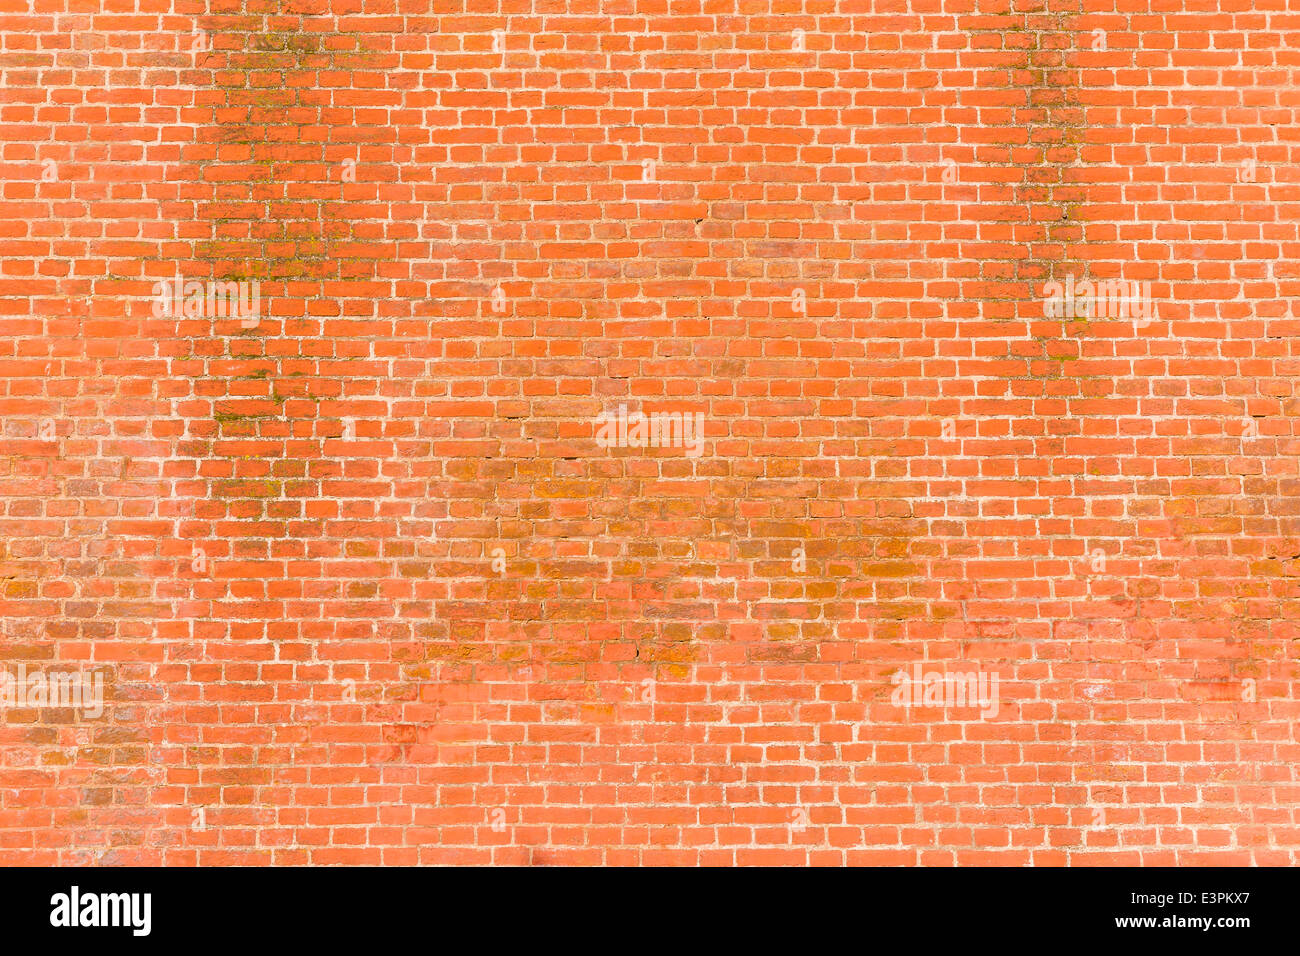 General view of the wall of Moscow Kremlin made of red bricks Stock Photo